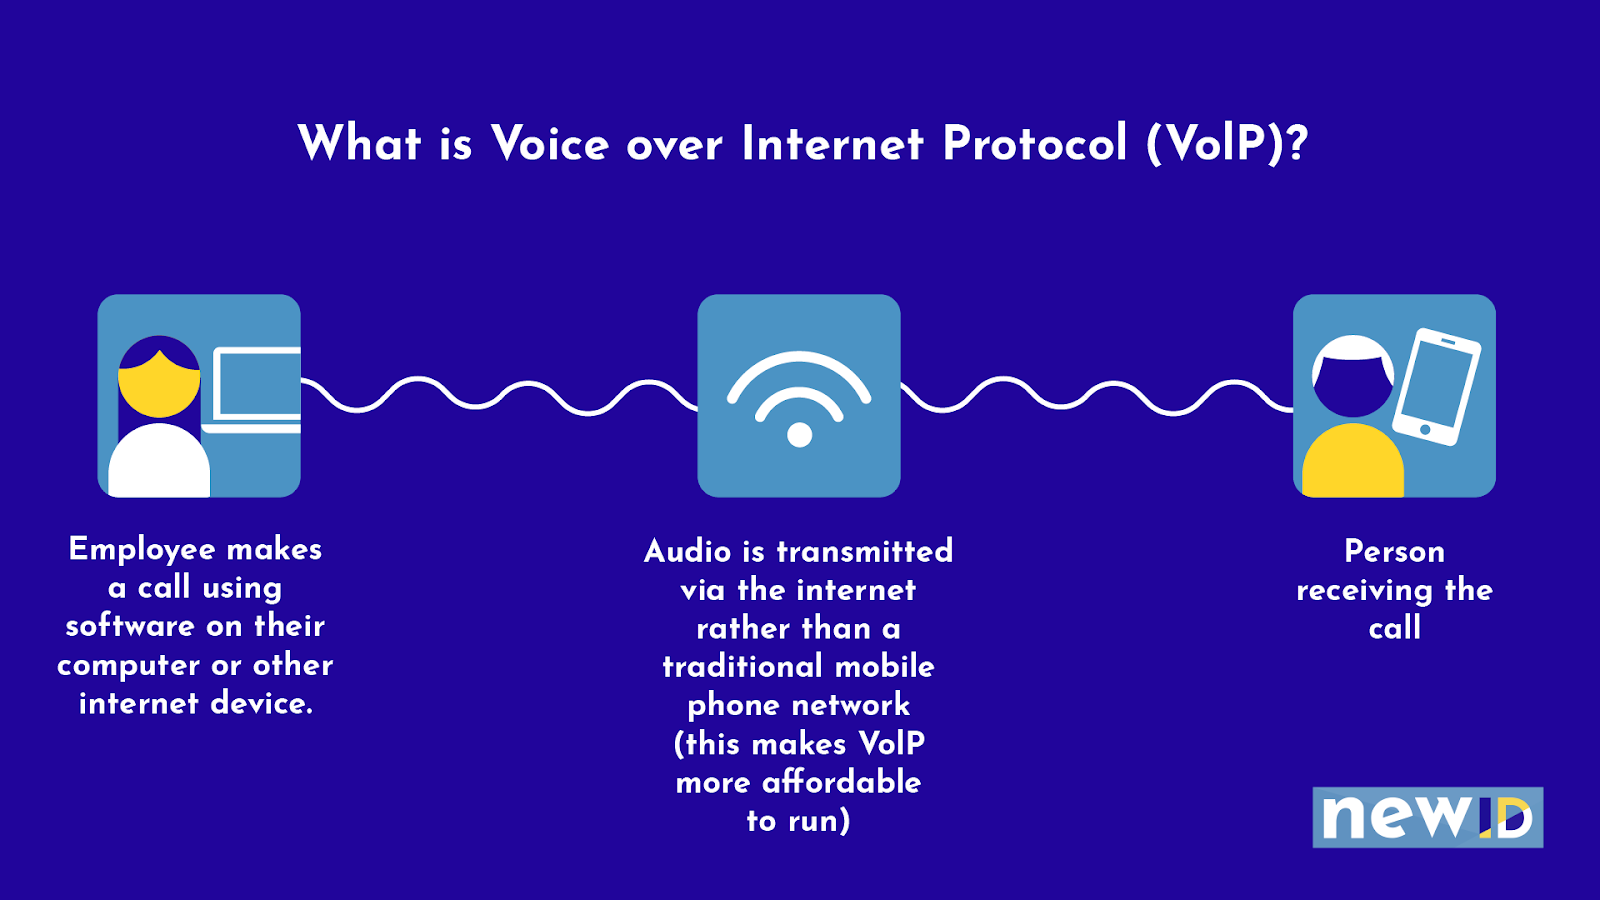 Diagram titled ‘What is Voice over Internet Protocol (VoIP). Three boxes are linked by a squiggly line. One box has a geometric woman next to a computer. It says ‘Employee makes a call using software on their computer or other internet device. The next box has a drawing of Wi-Fi signals. It says ‘Audio is transmitted via the internet rather than a traditional mobile phone network (this makes VoIP more affordable to run). The last box has a geometric person with a mobile phone. It says ‘Person receiving the call’. 